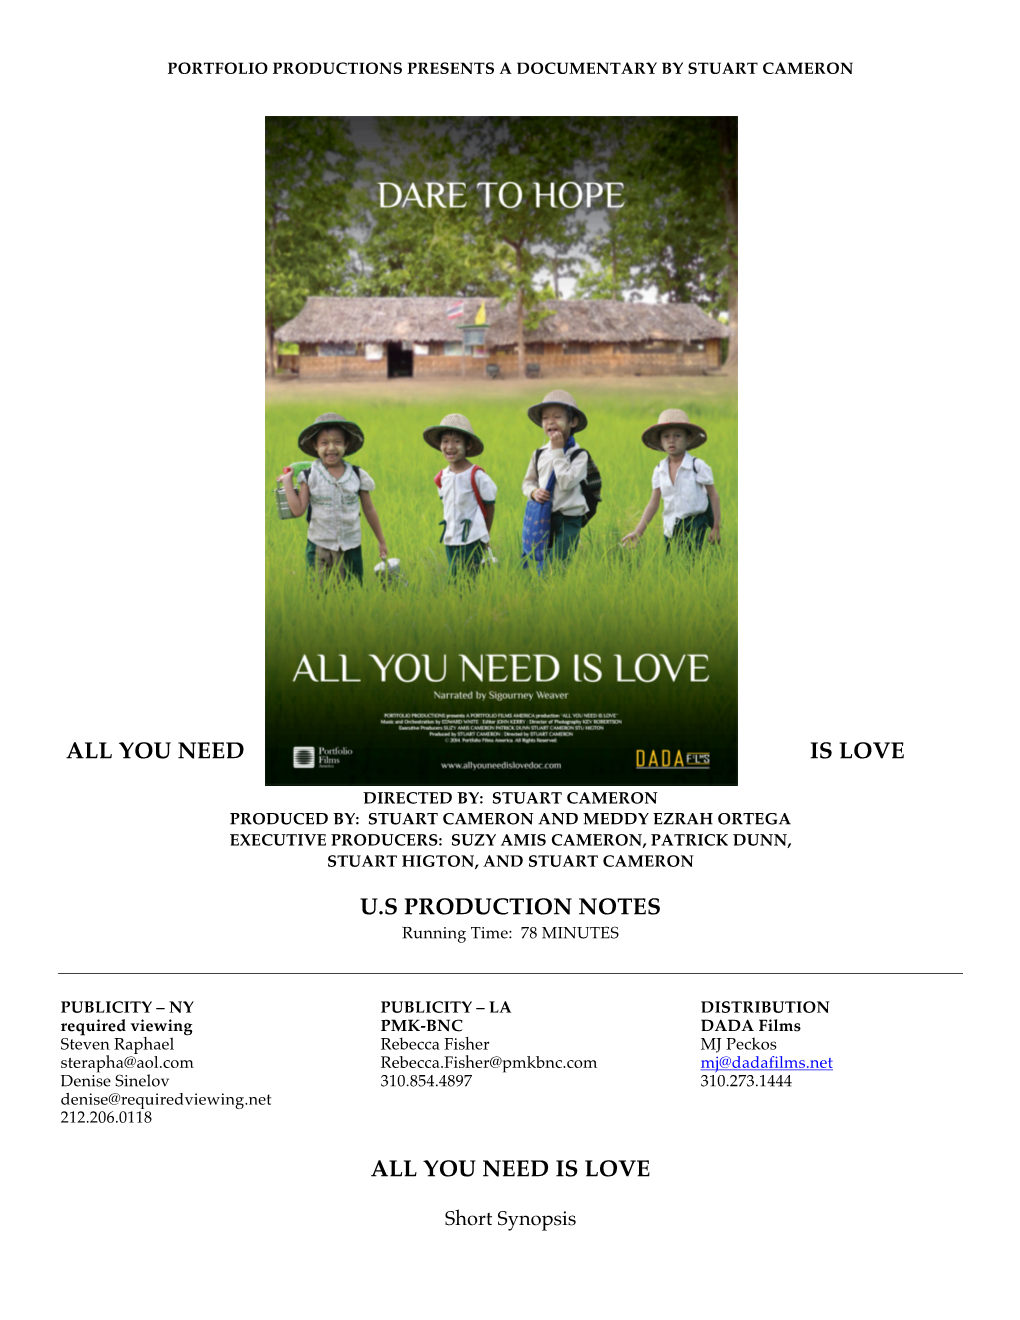 You Need Is Love Us Production